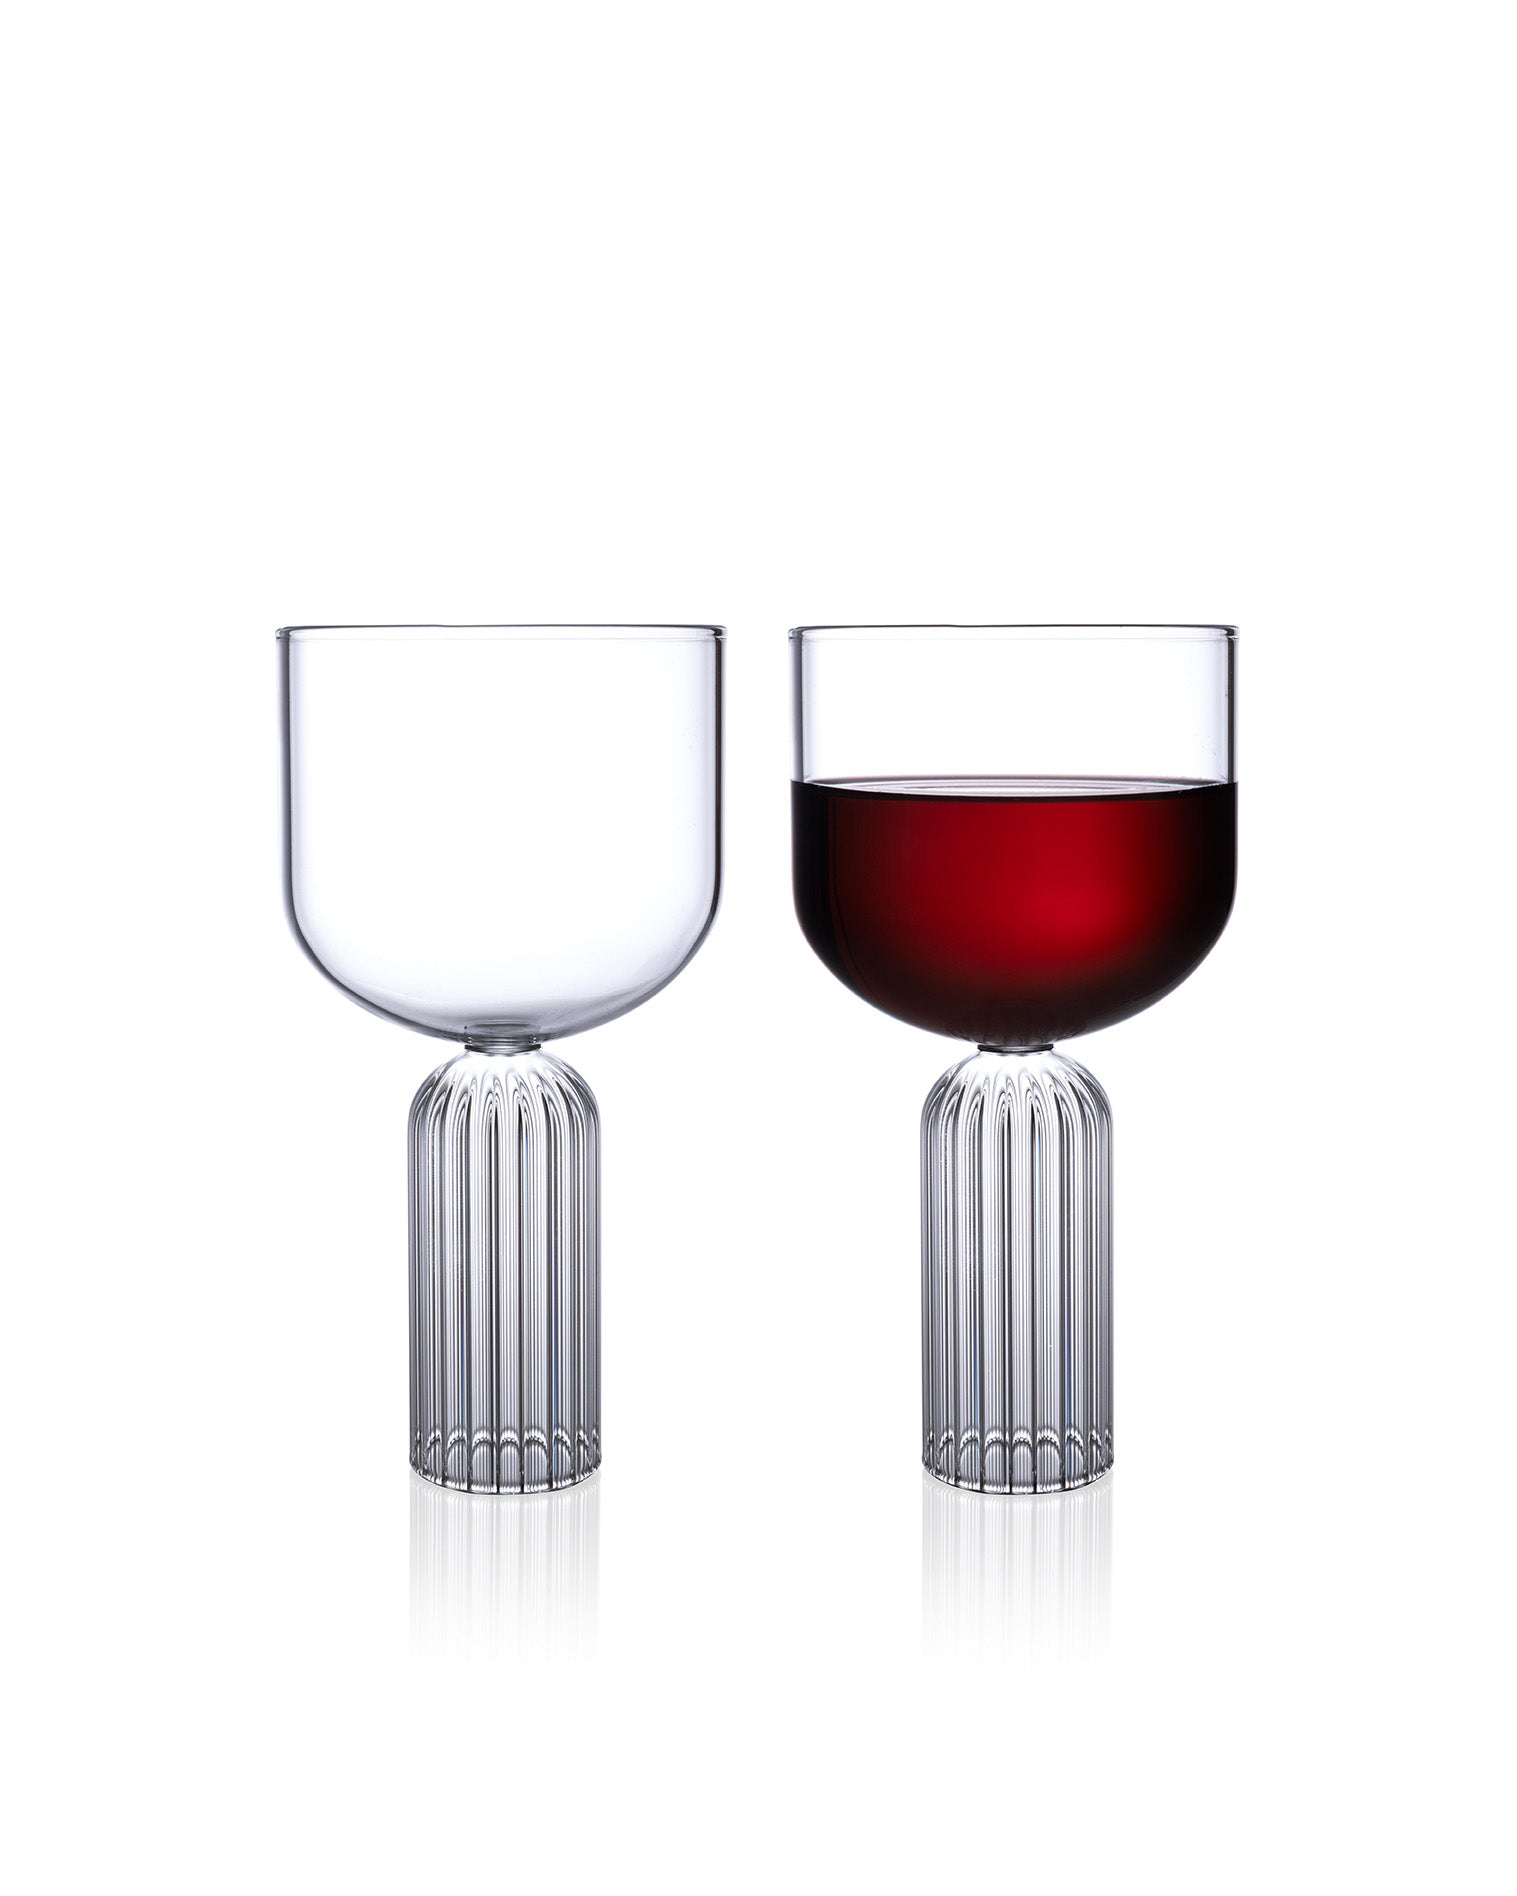 elysian collective may czech red wine glassware designed by felicia ferrone